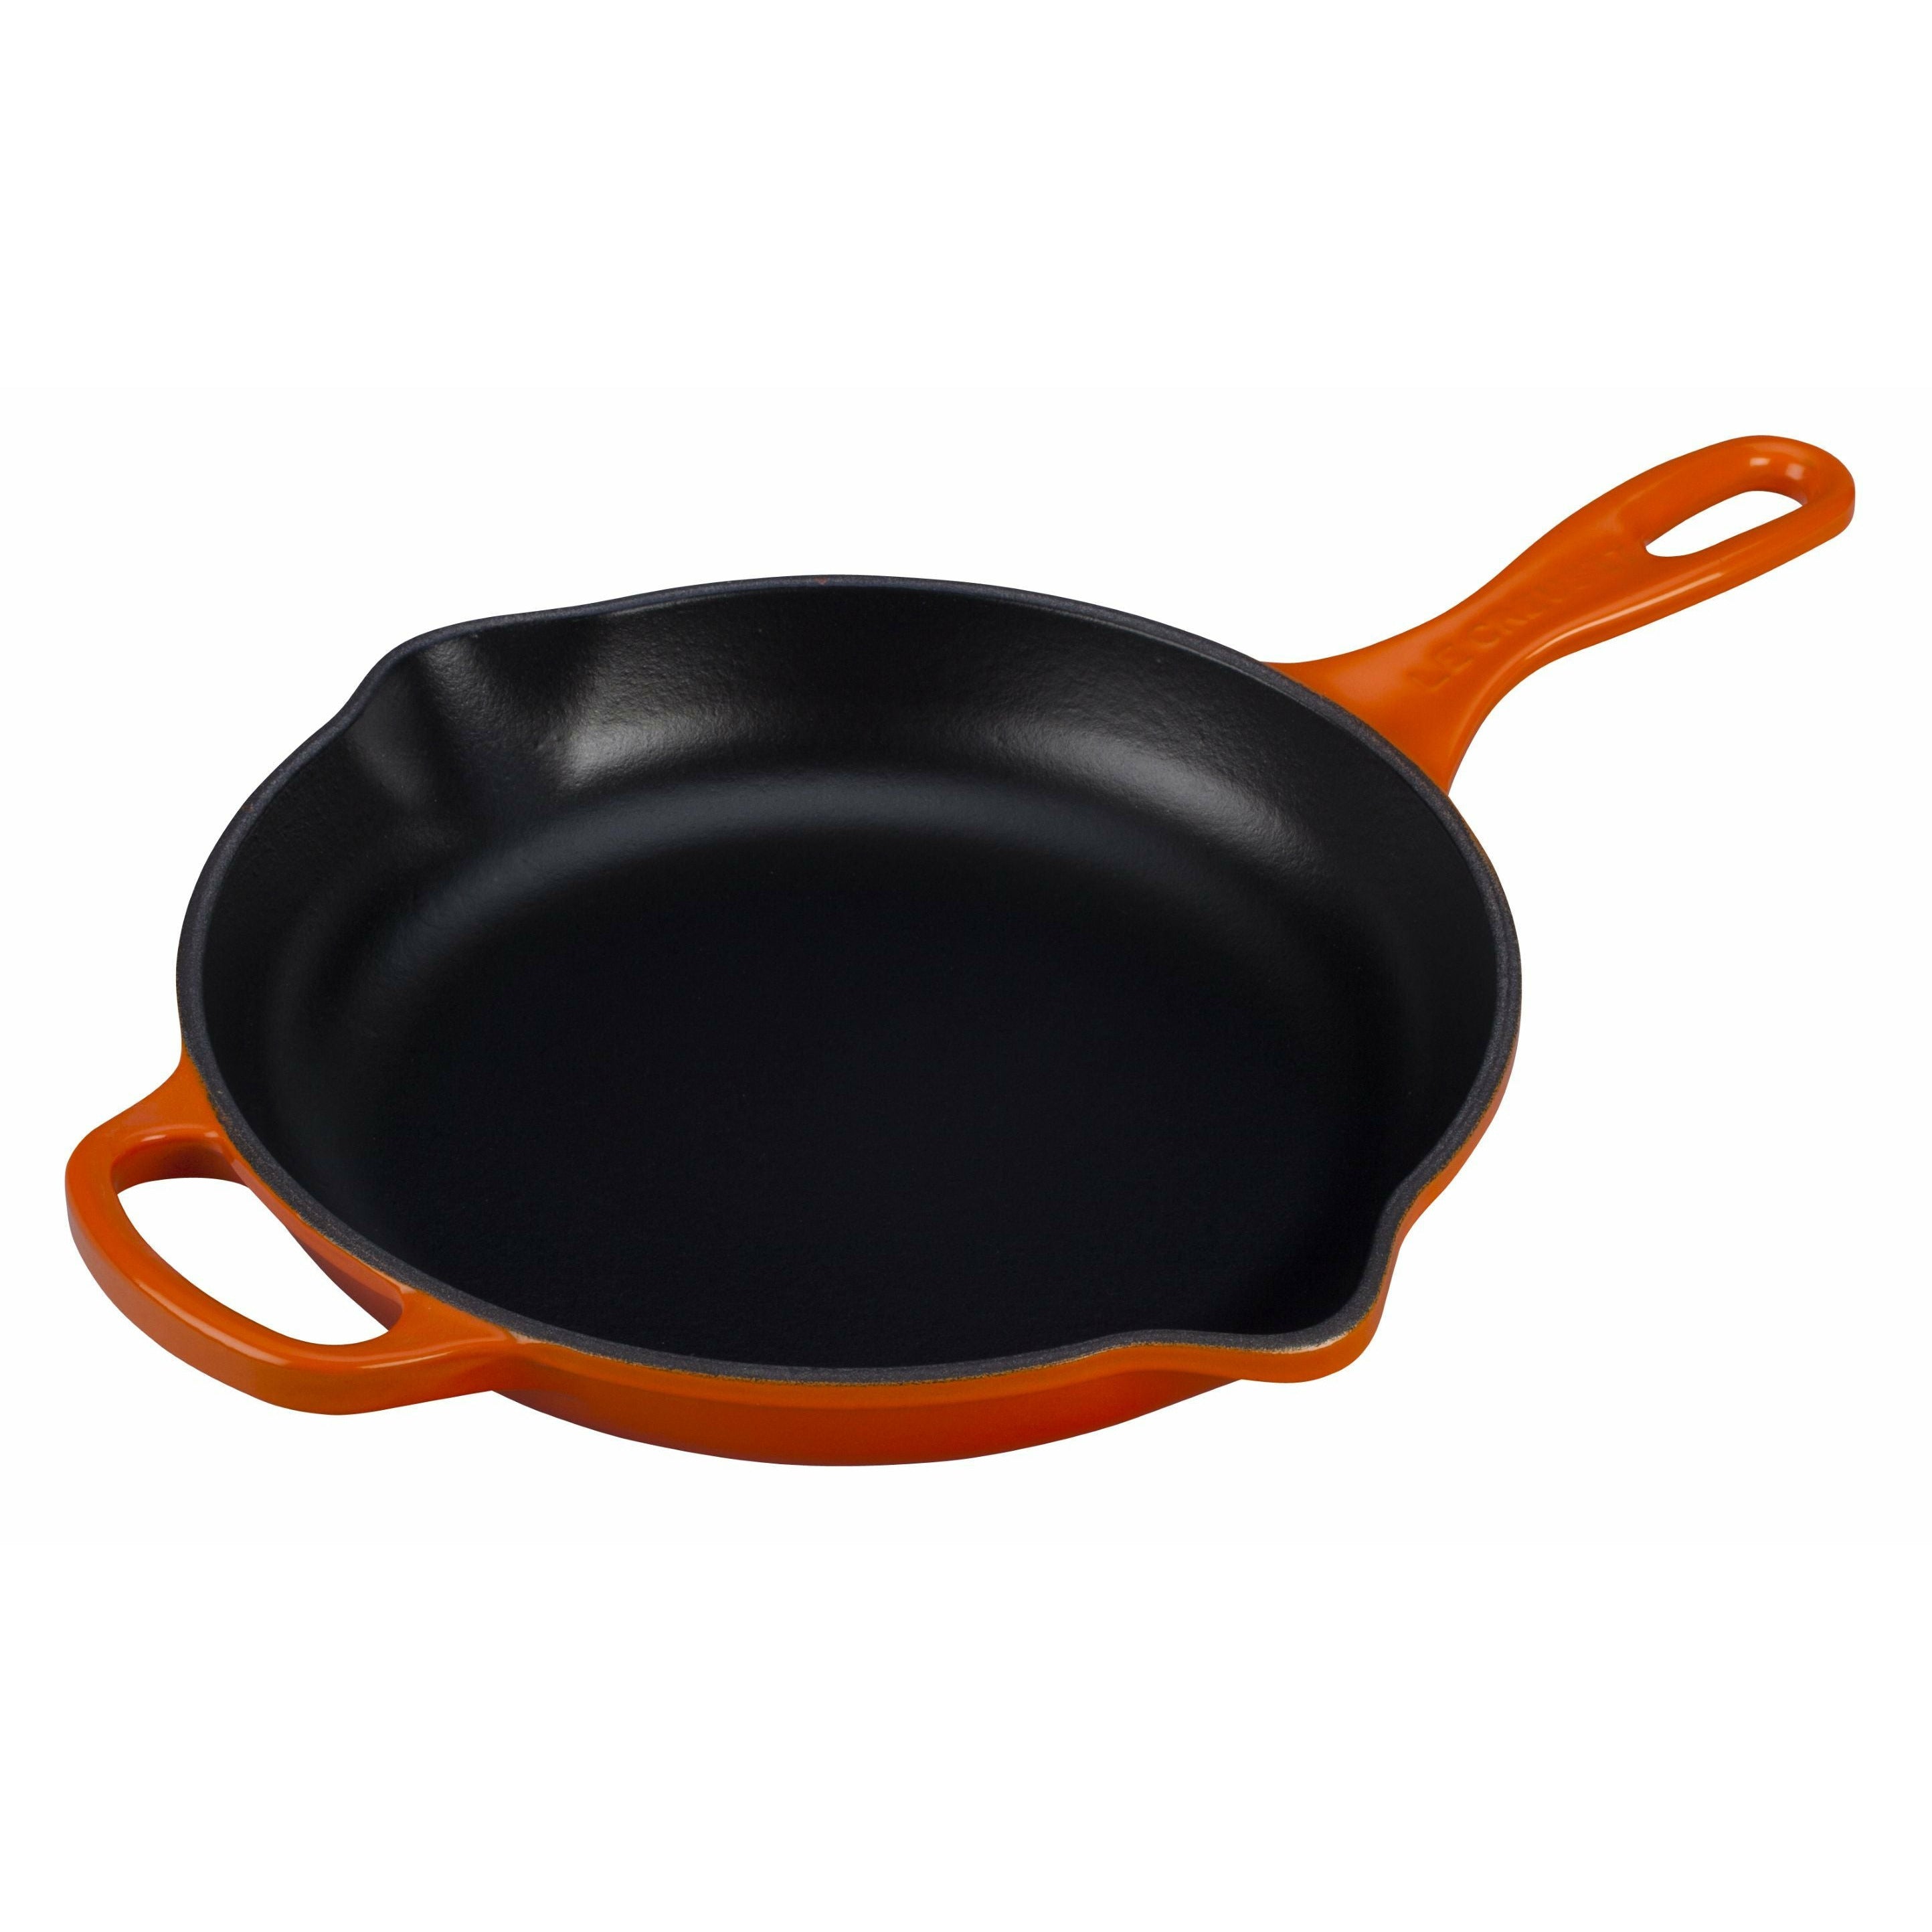 Le Creuset Signature Round Frying and Servant Pan 20 cm, four rouge